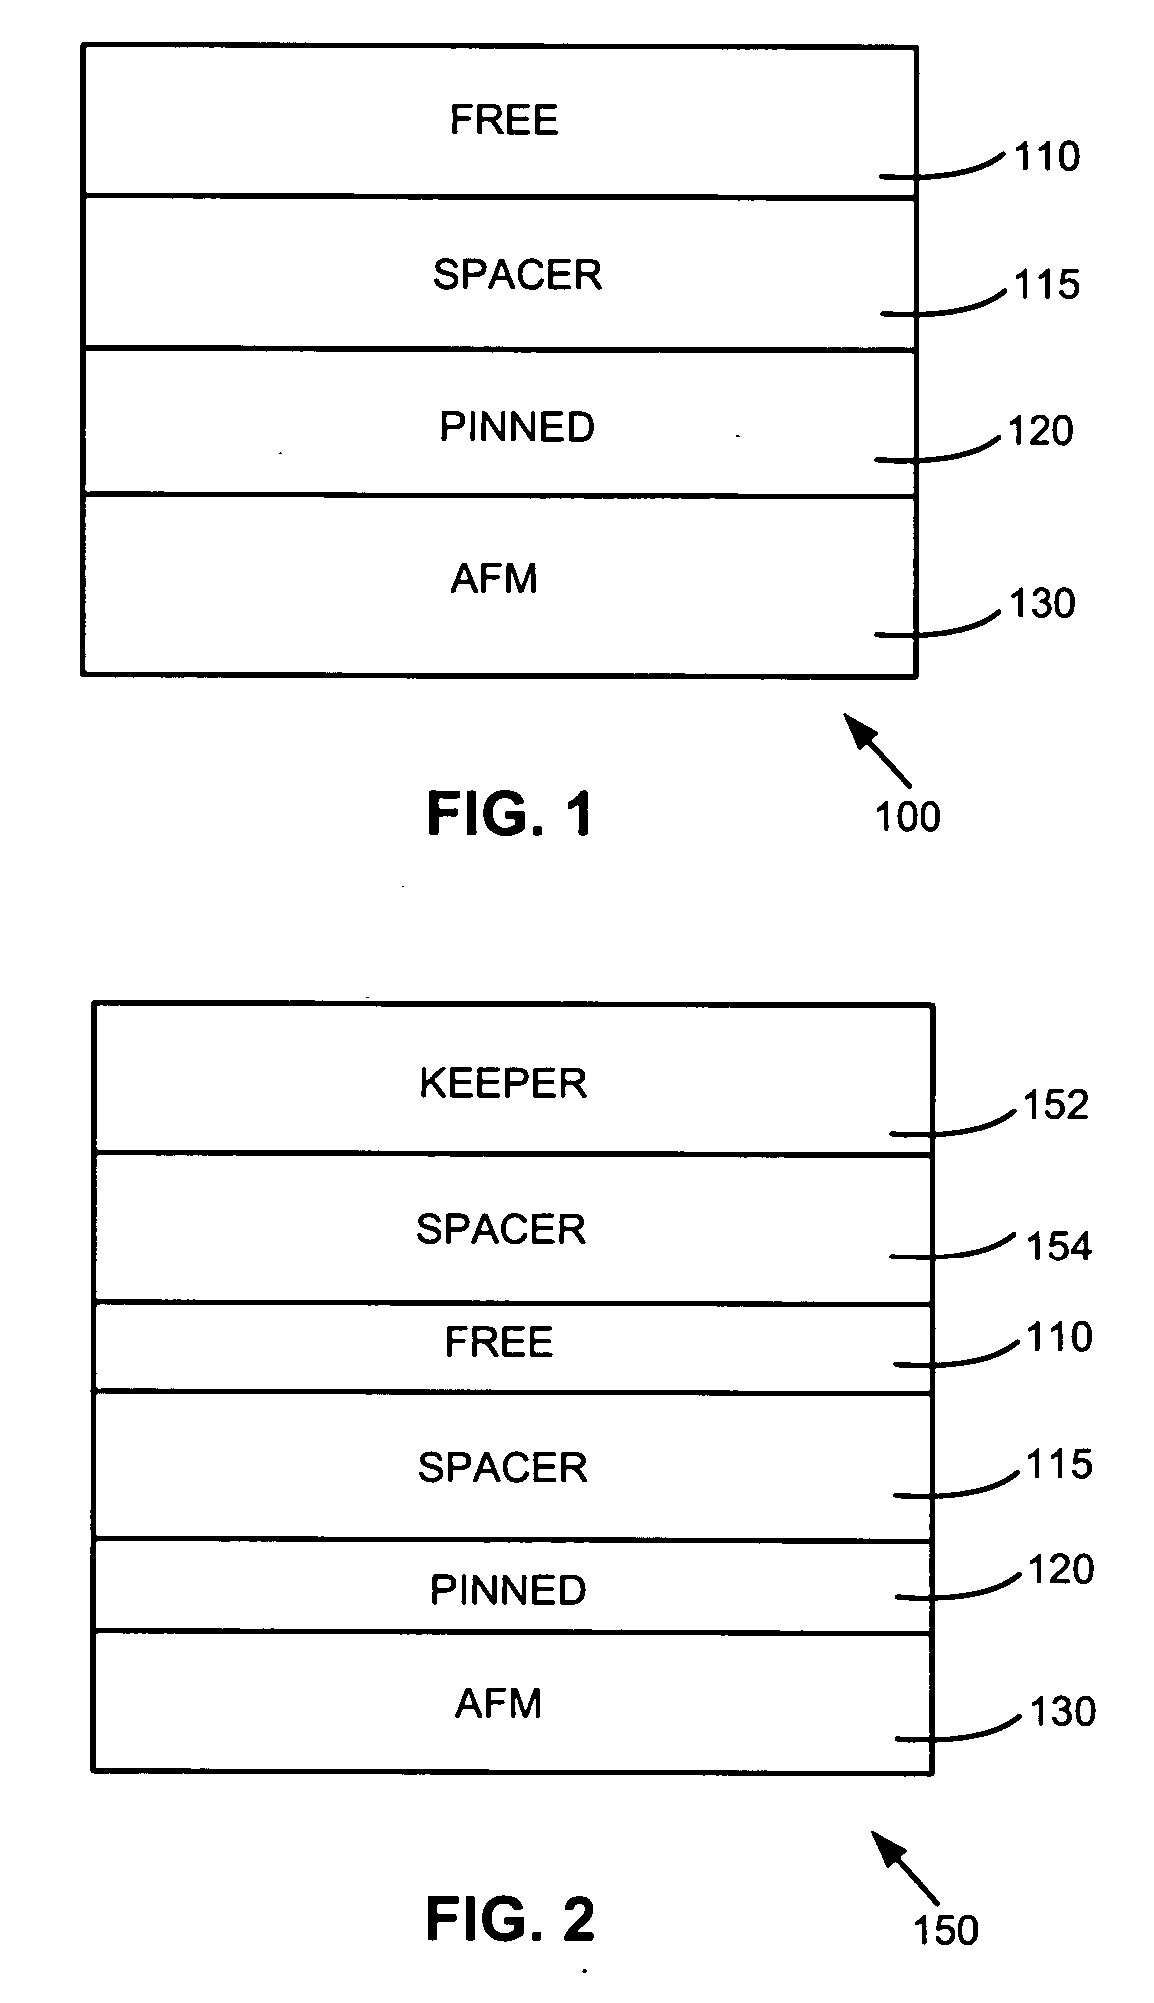 Sensor with in-stack bias structure providing enhanced magnetostatic stabilization